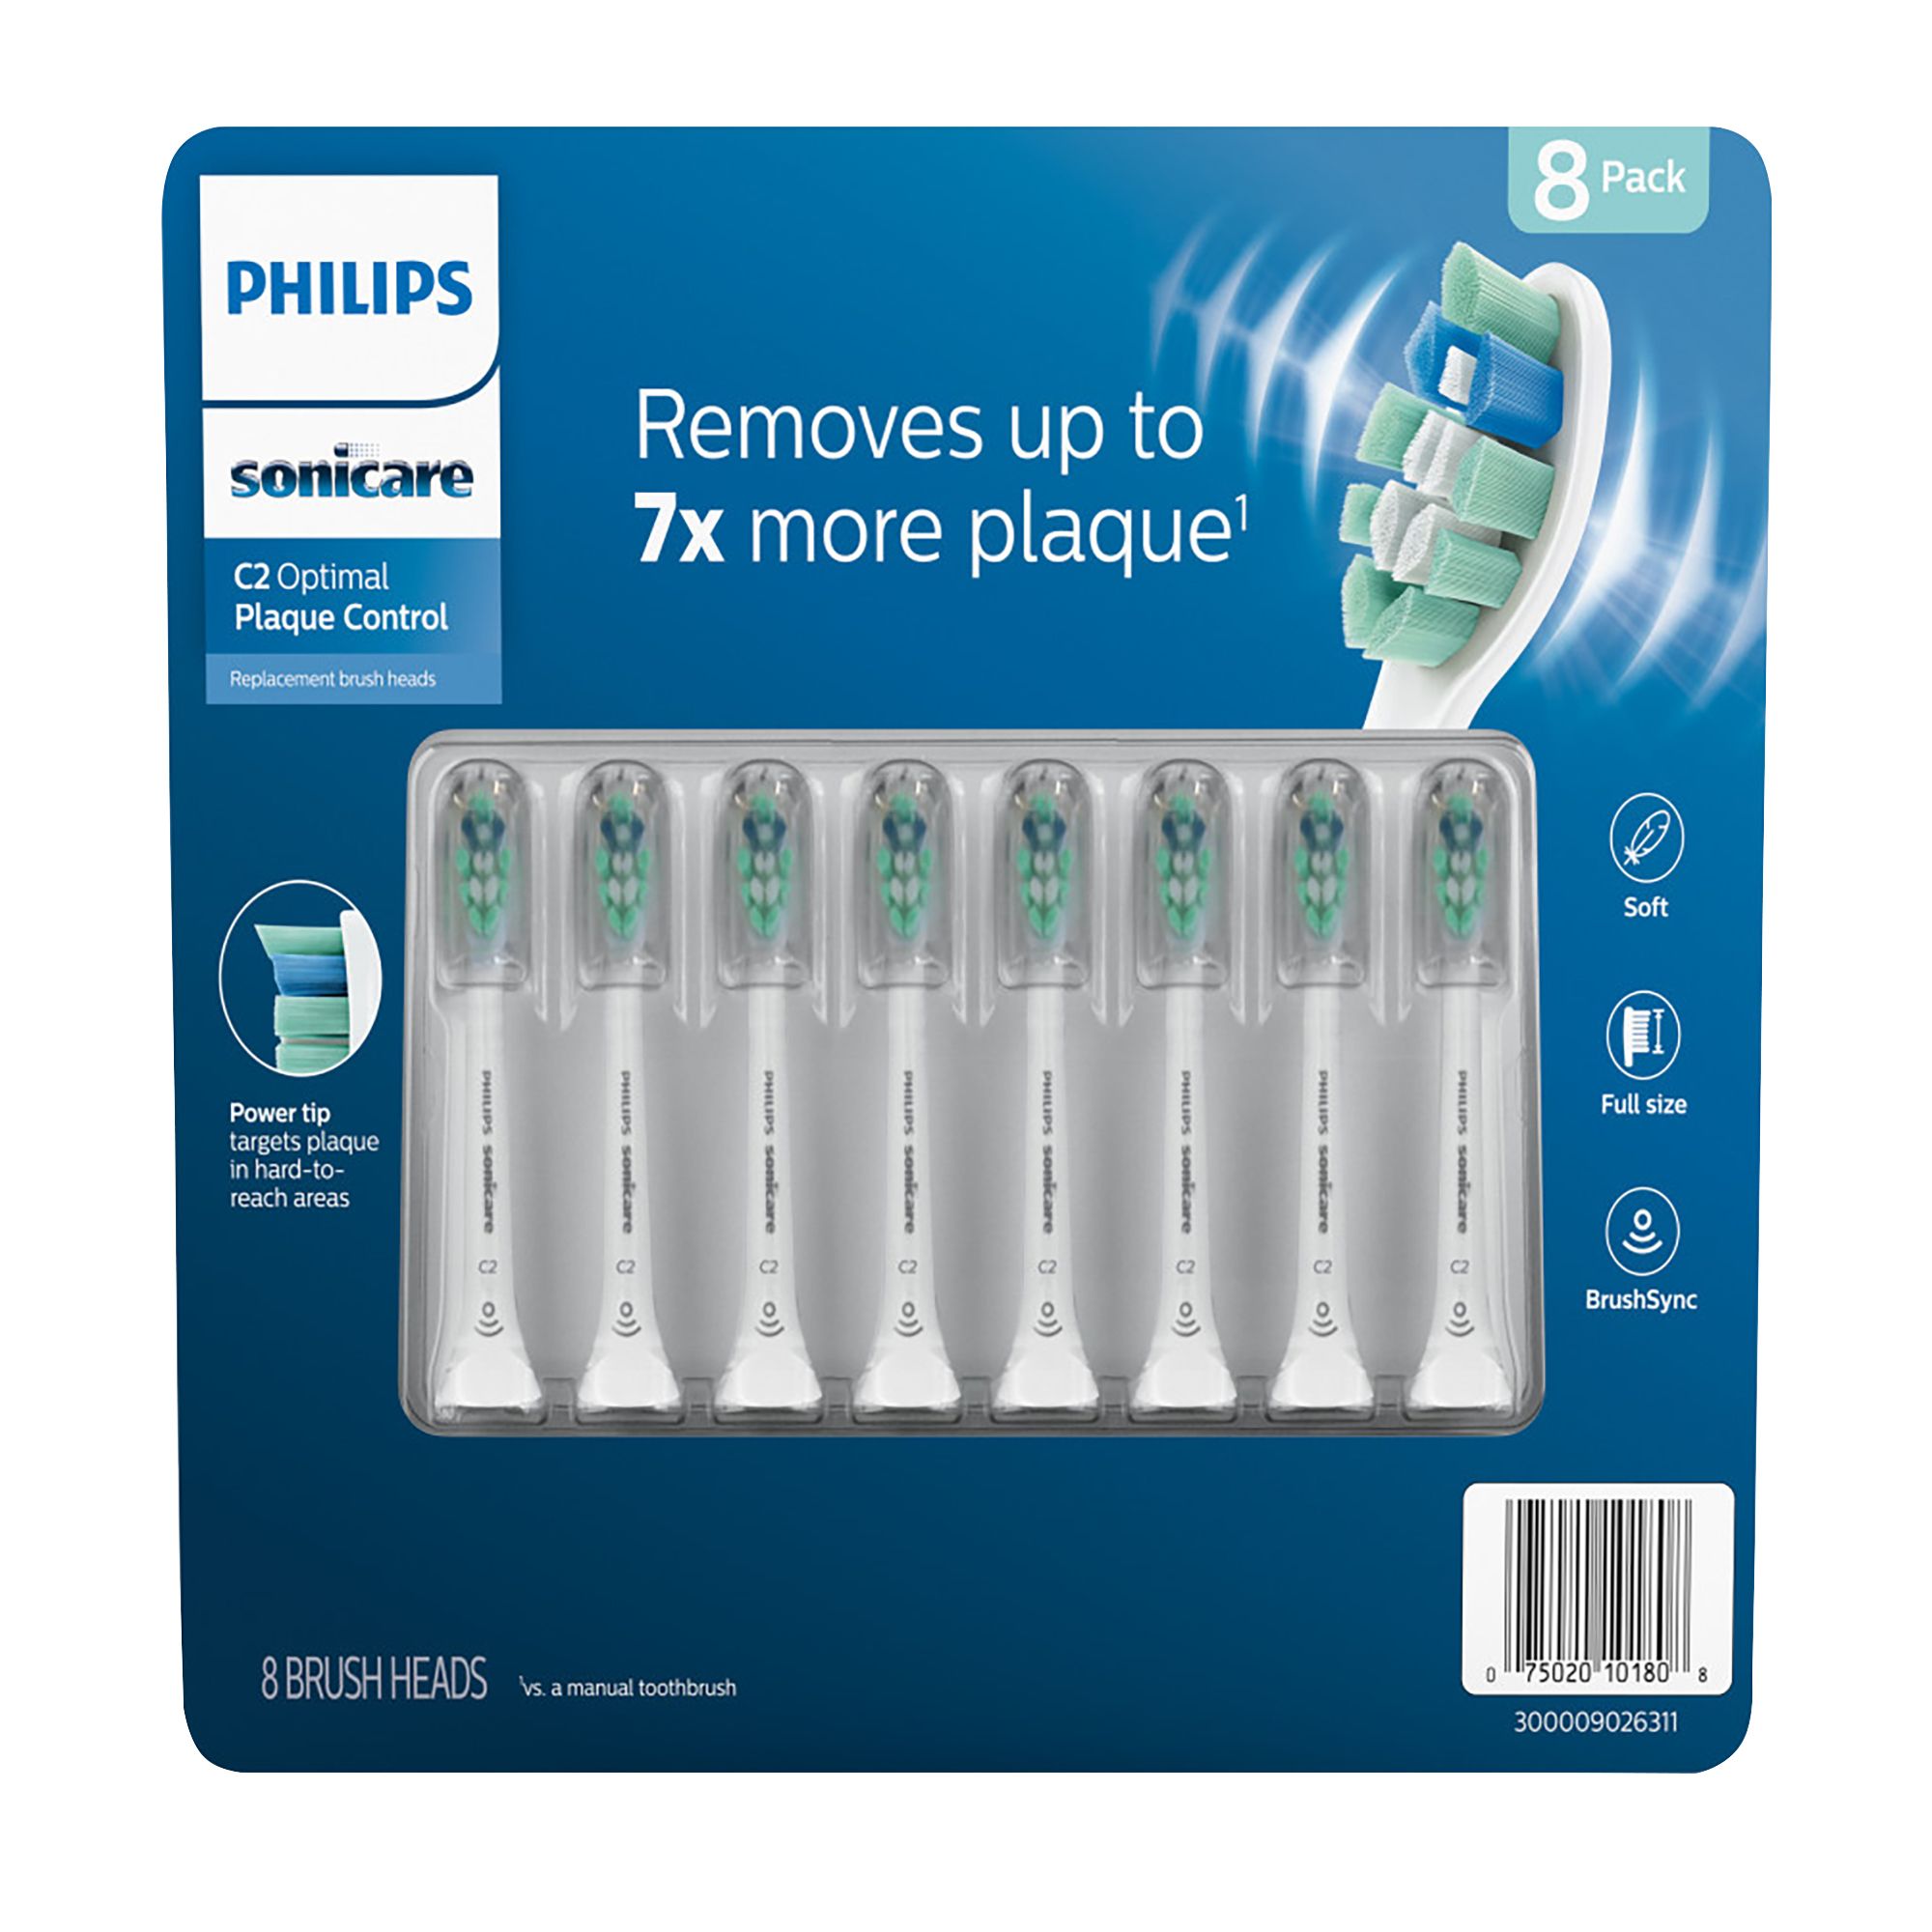 Philips Sonicare Replacement Toothbrush Heads with BrushSync Technology, 8 pk. - White